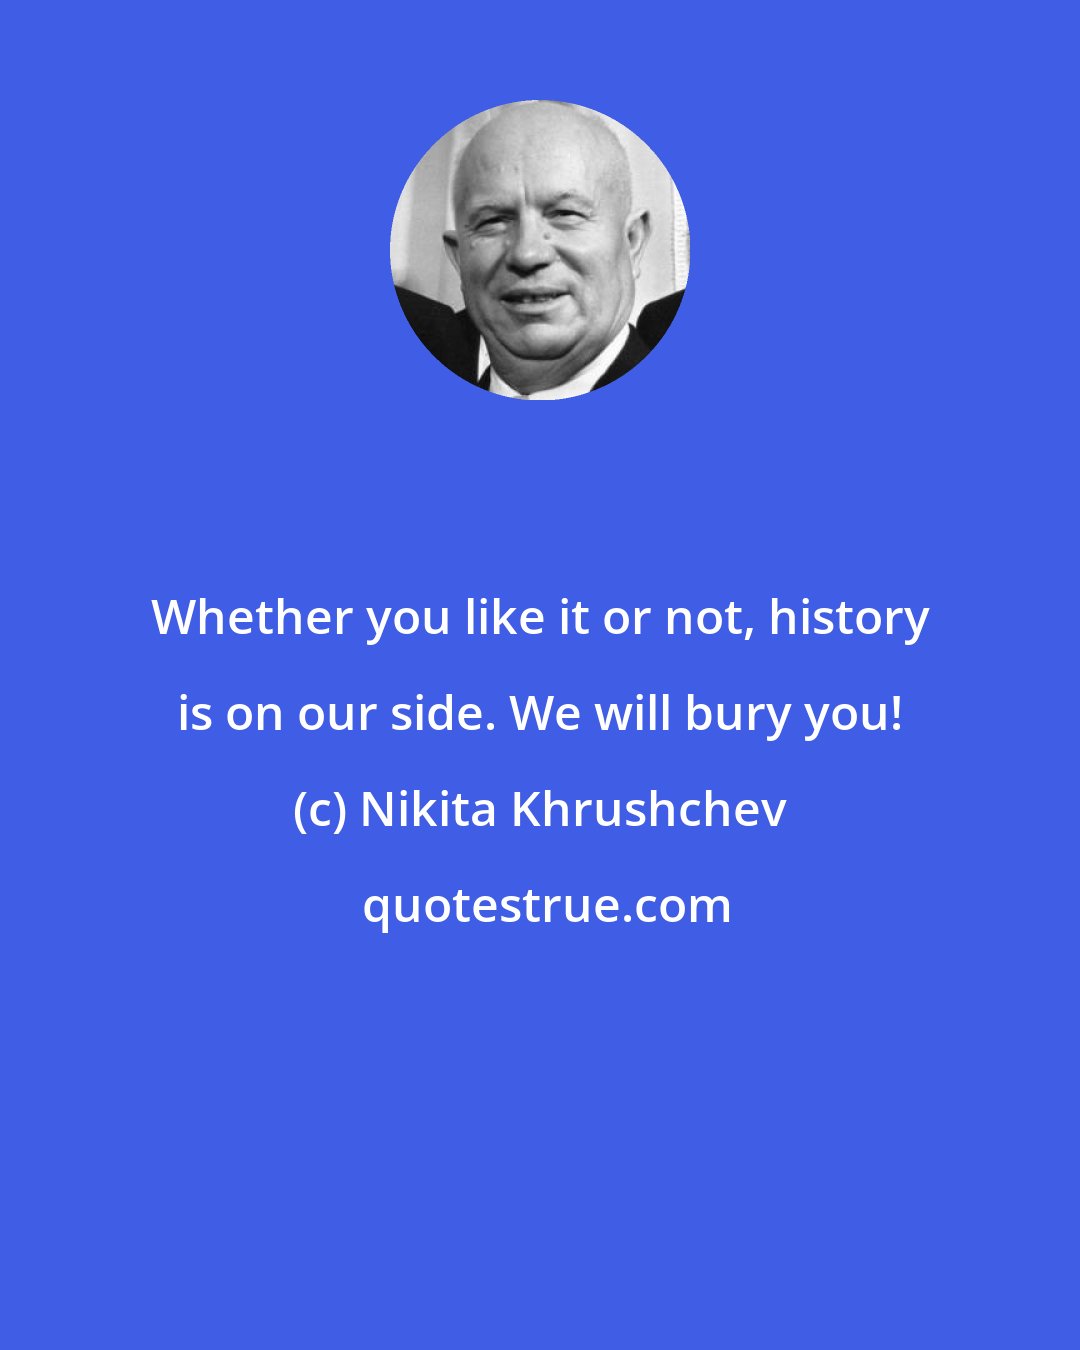 Nikita Khrushchev: Whether you like it or not, history is on our side. We will bury you!